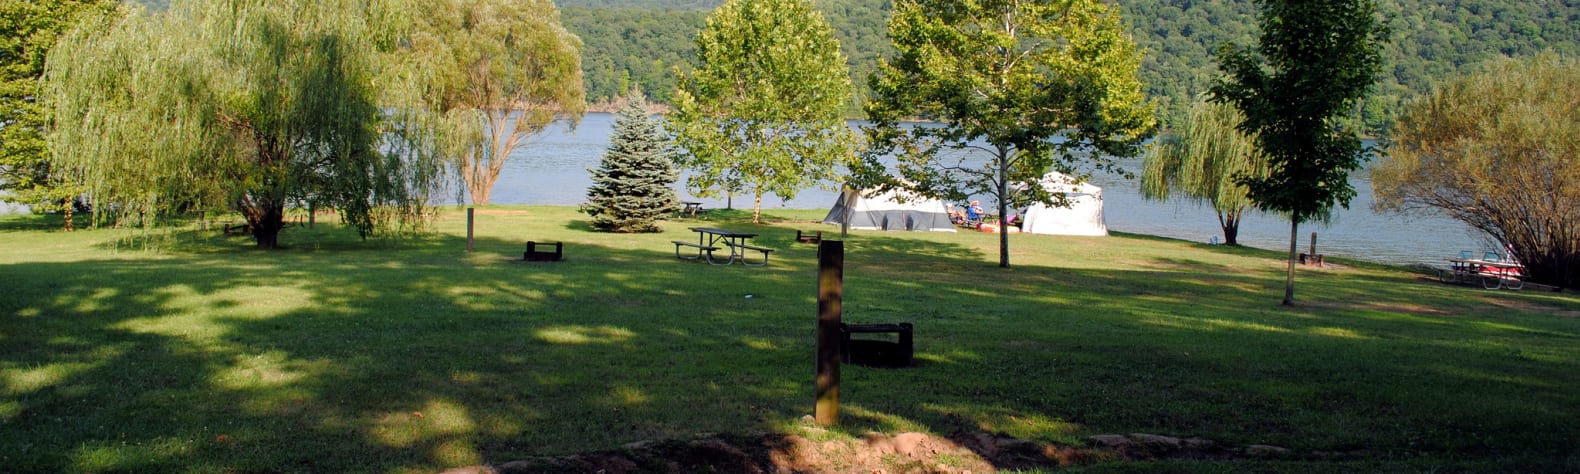 The Best Fishing Spots Raystown Lake Has To Offer - Ridgeview Campground